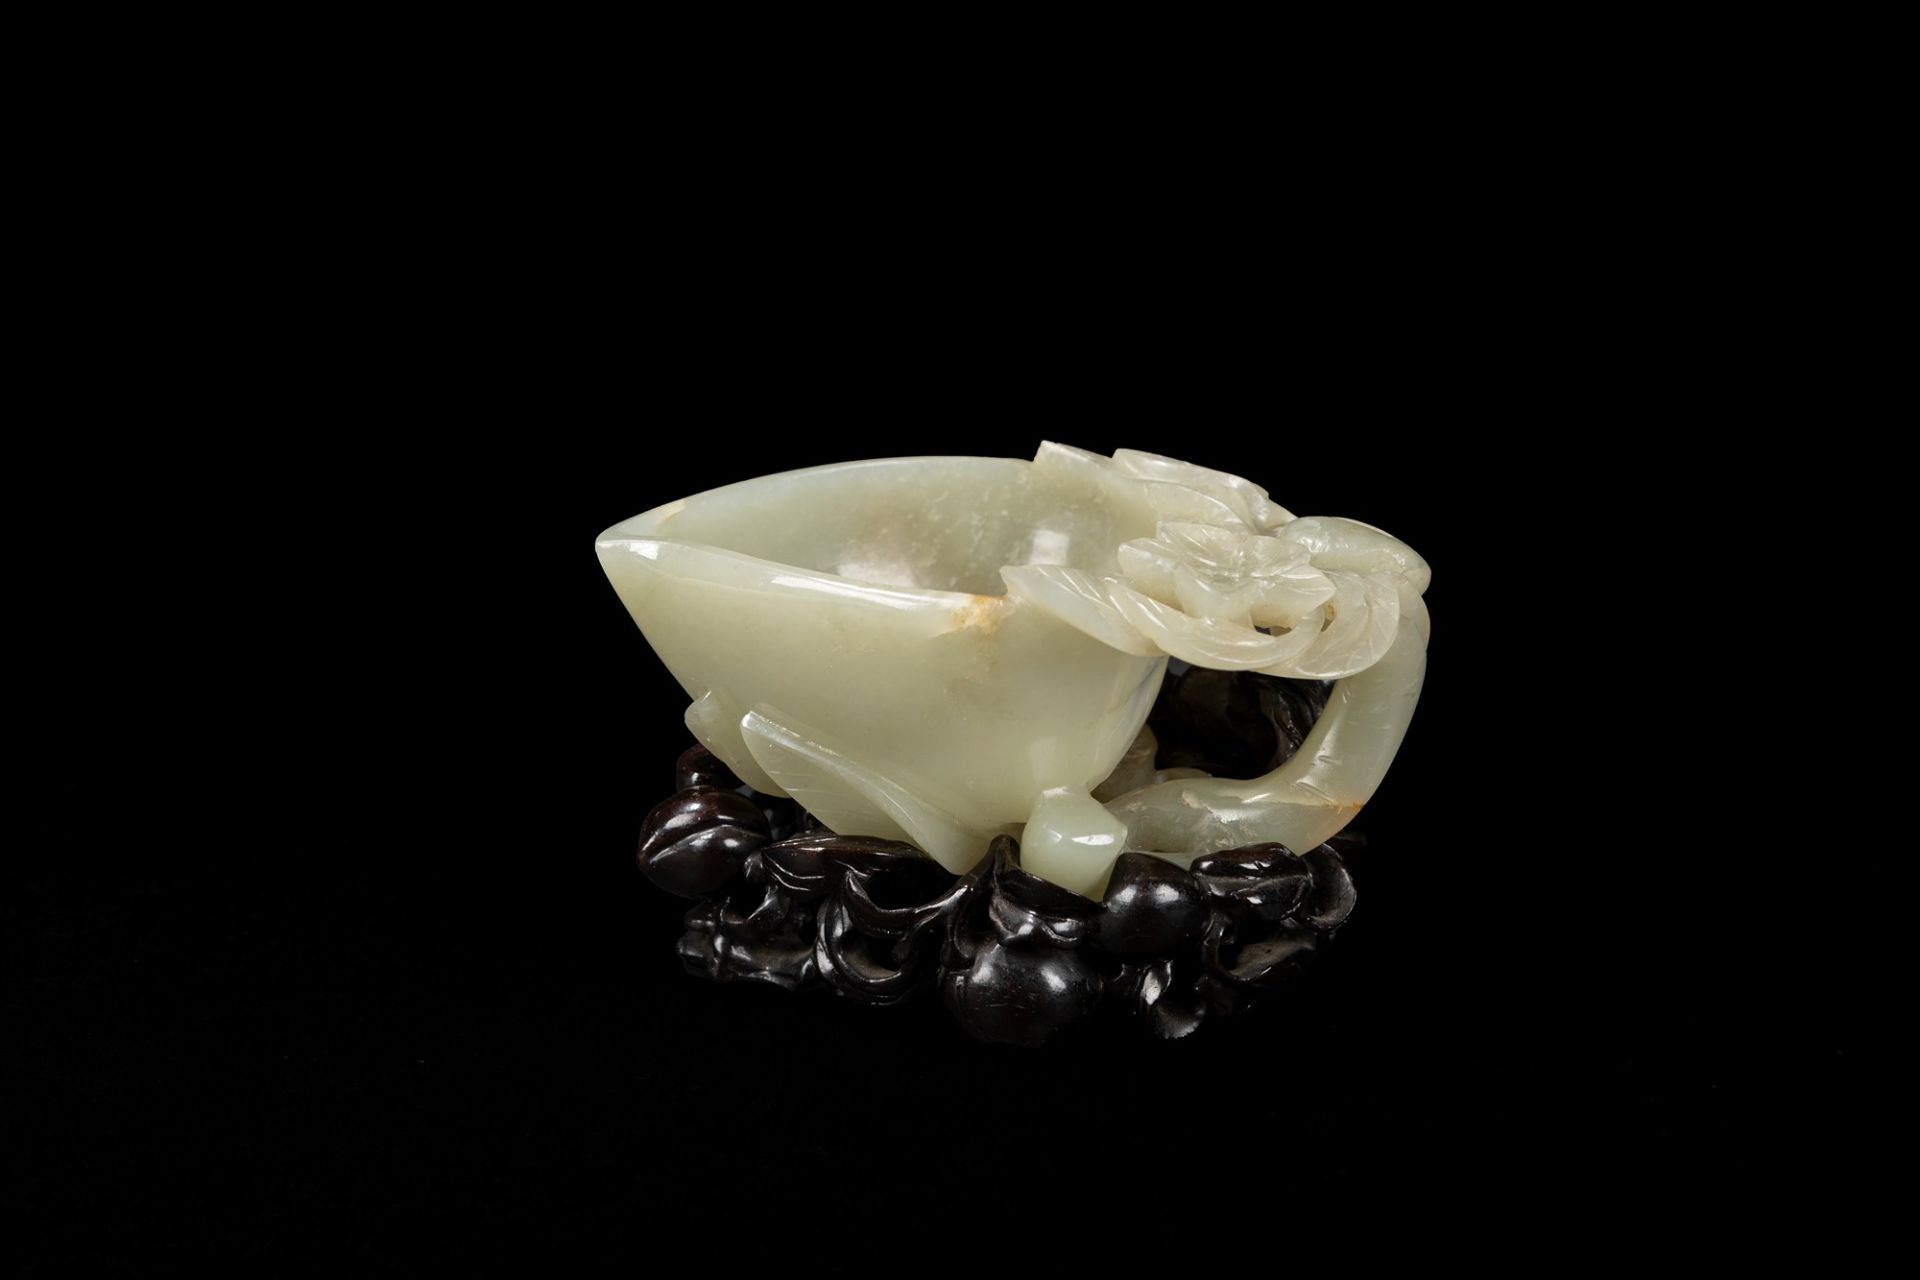 A FINE CELADON JADE PEACH FORM POURING VESSEL, China, Ming Dynasty, 17th century - Image 2 of 3